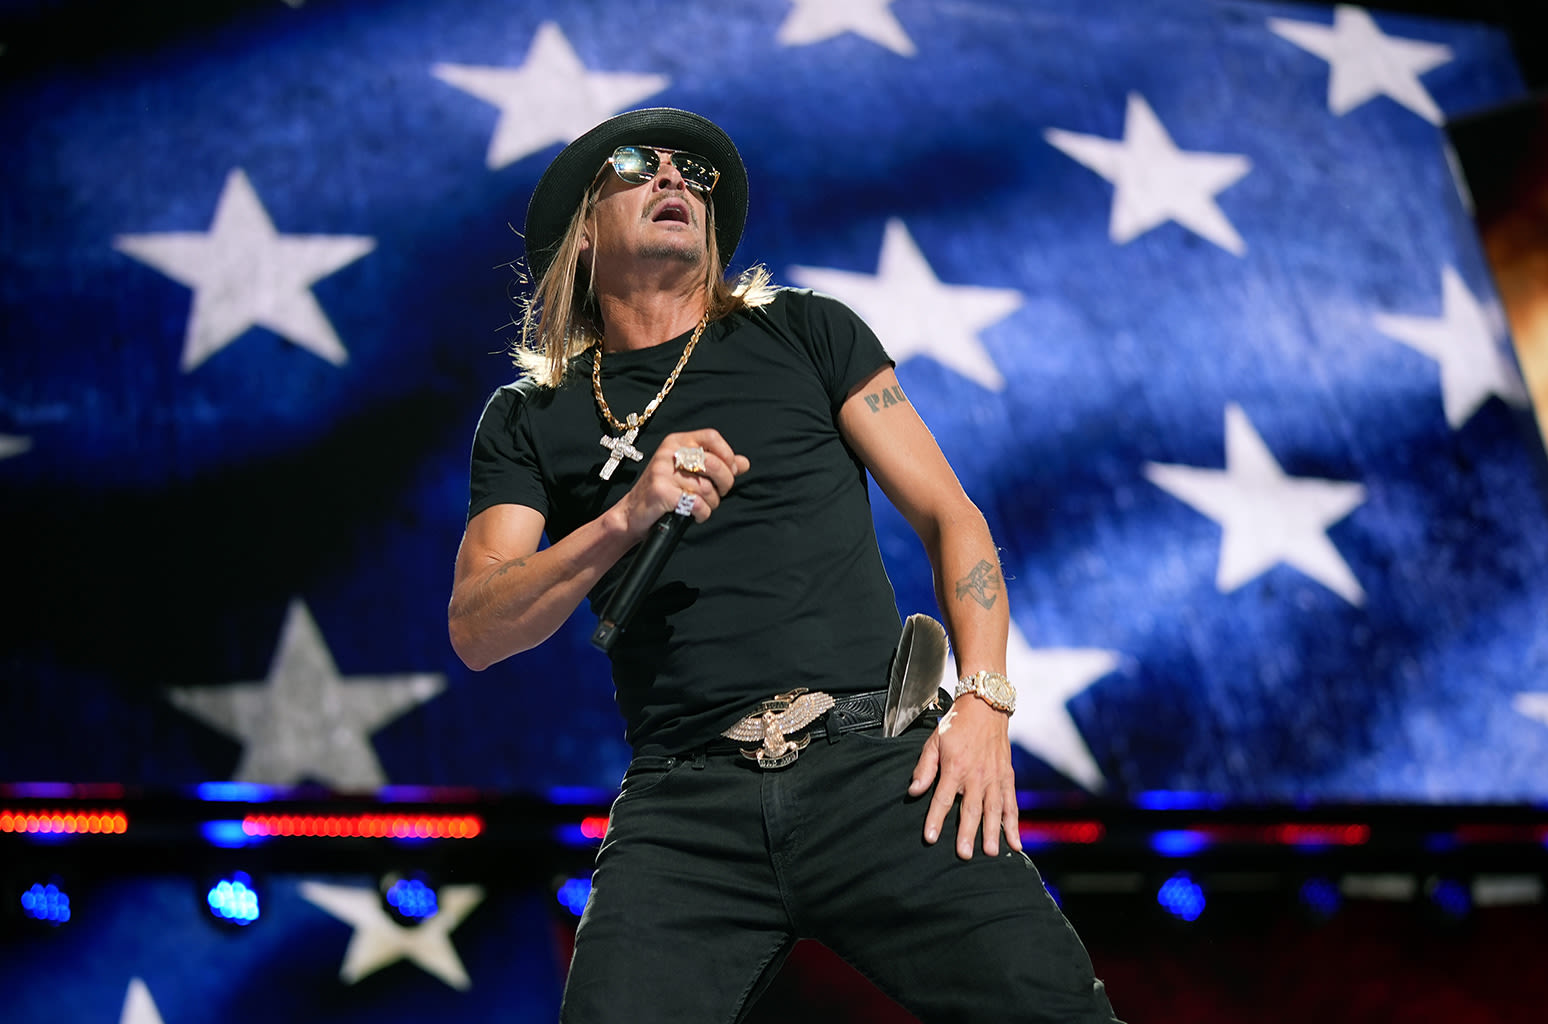 Kid Rock Performed at the RNC & the Internet Has Thoughts